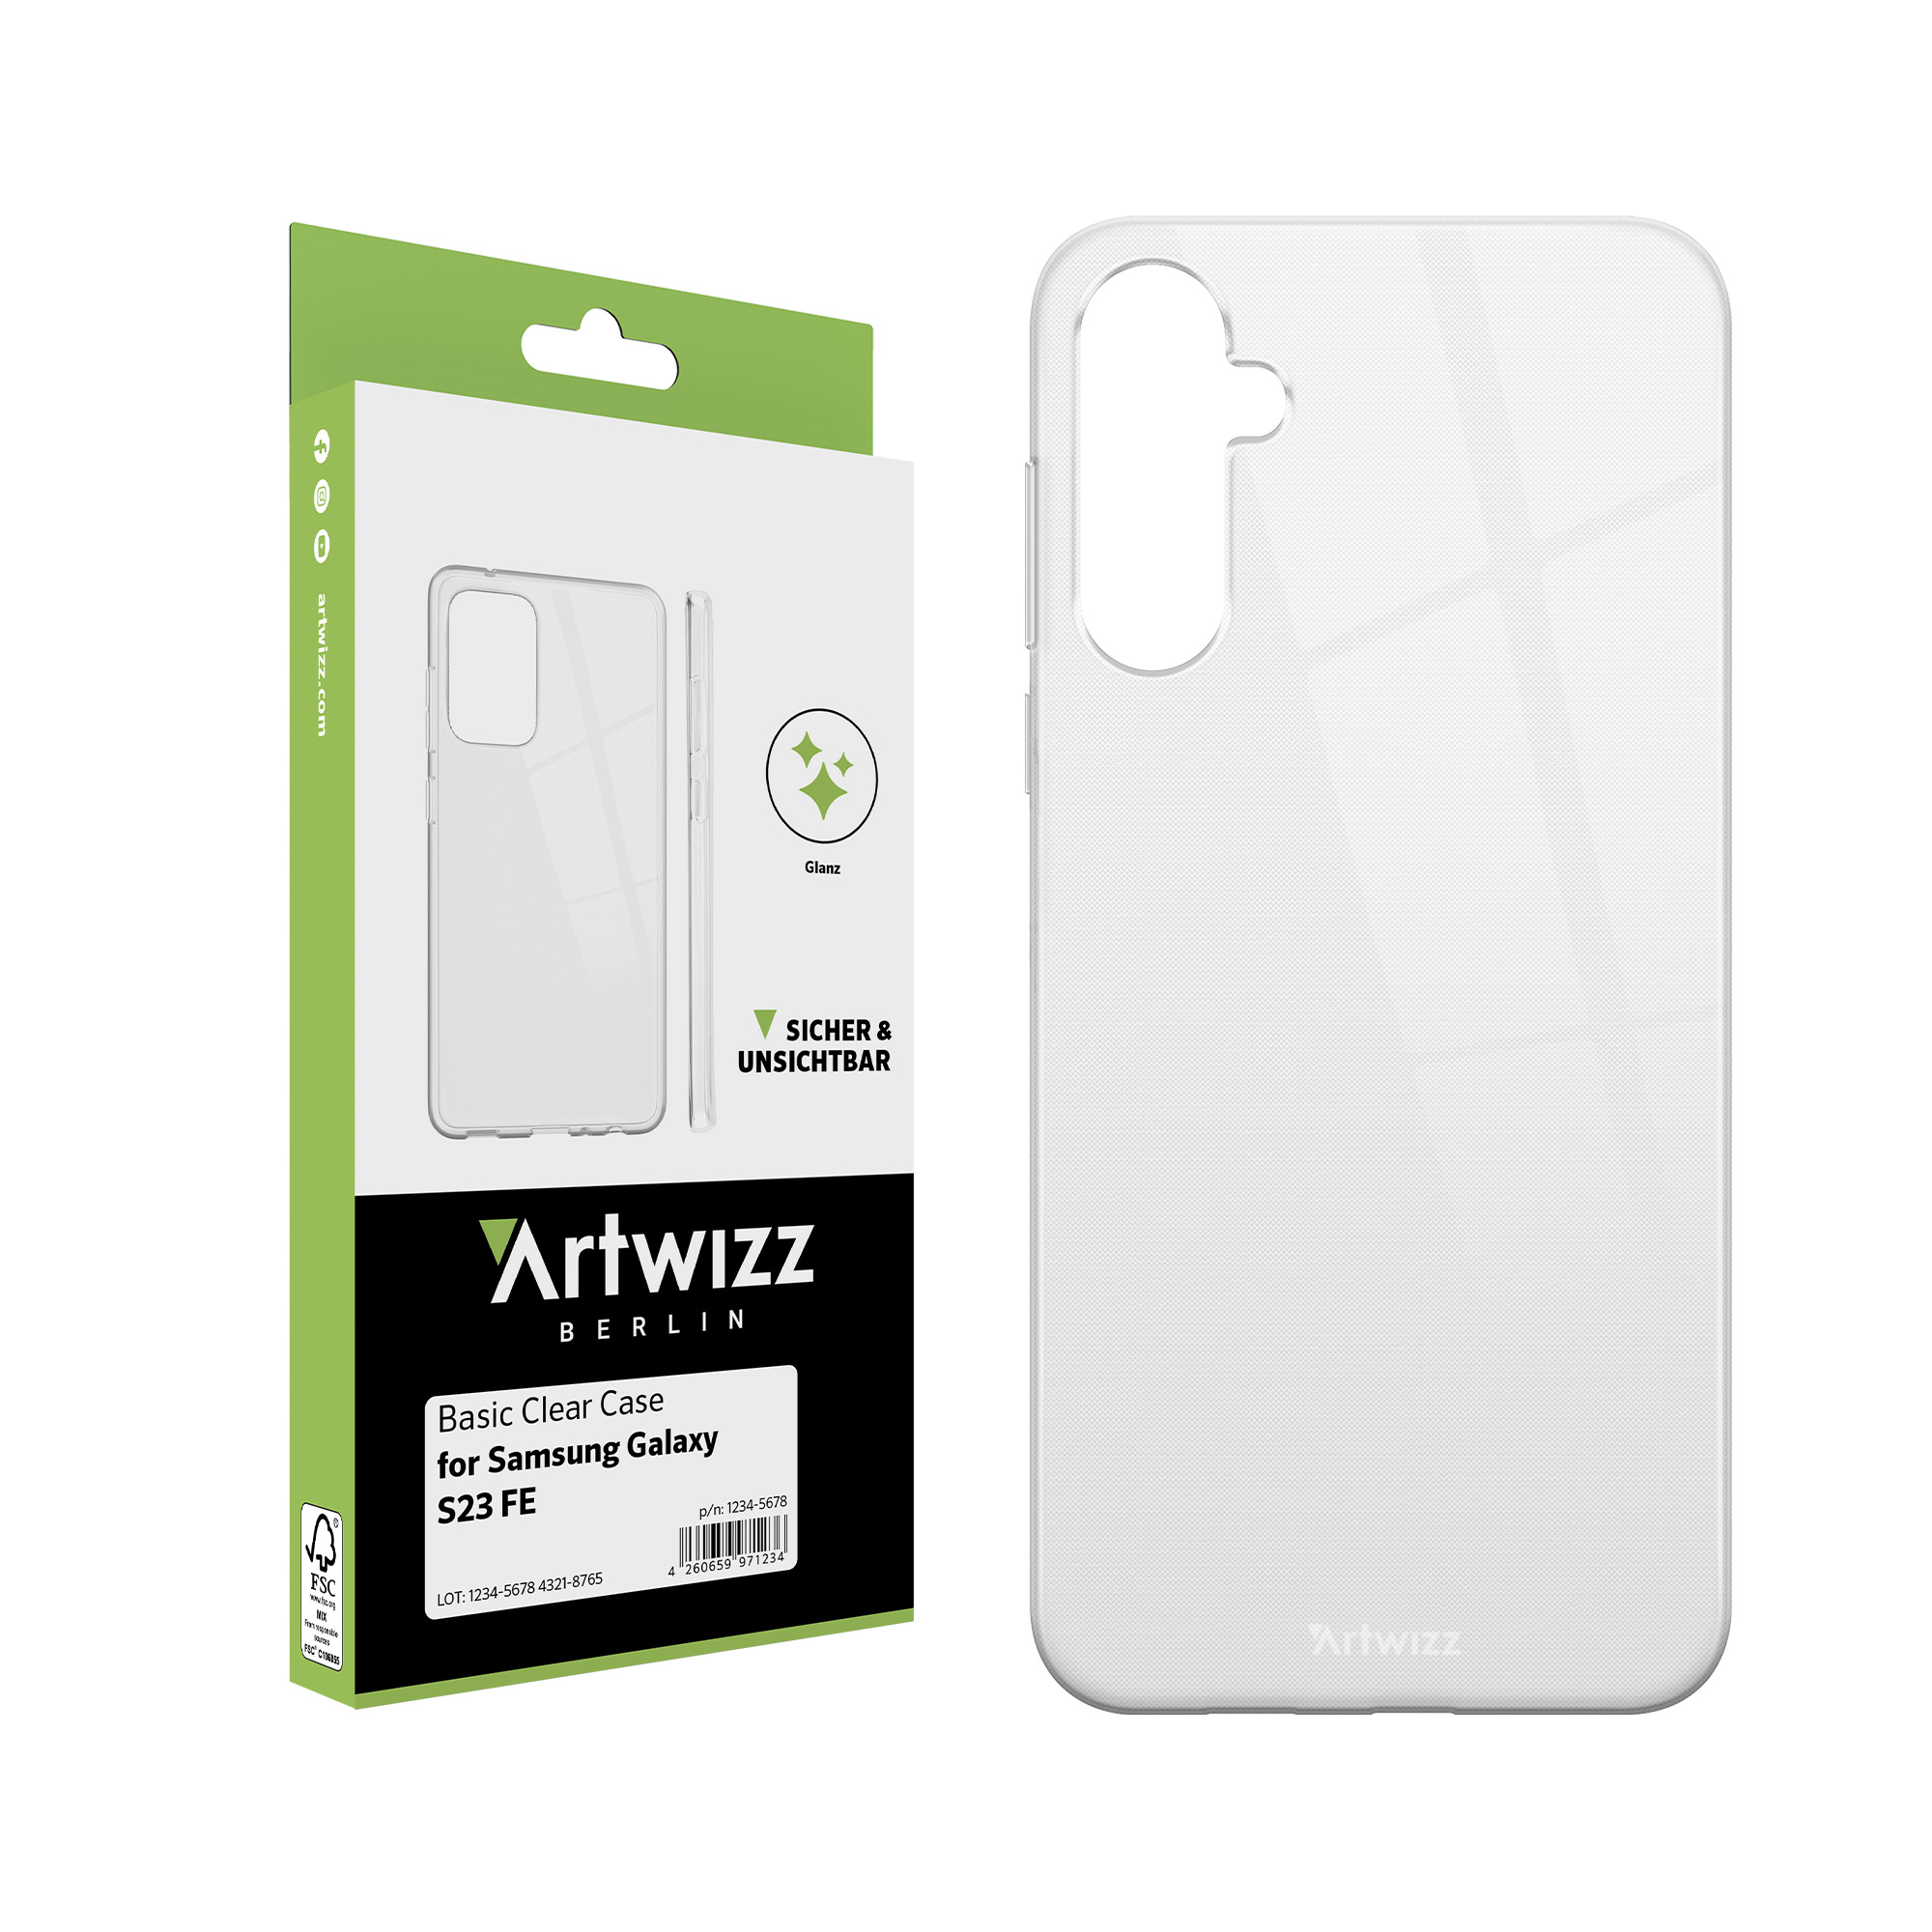 ARTWIZZ Basic Clear Case, Backcover, Transparent S23 Samsung, Galaxy FE